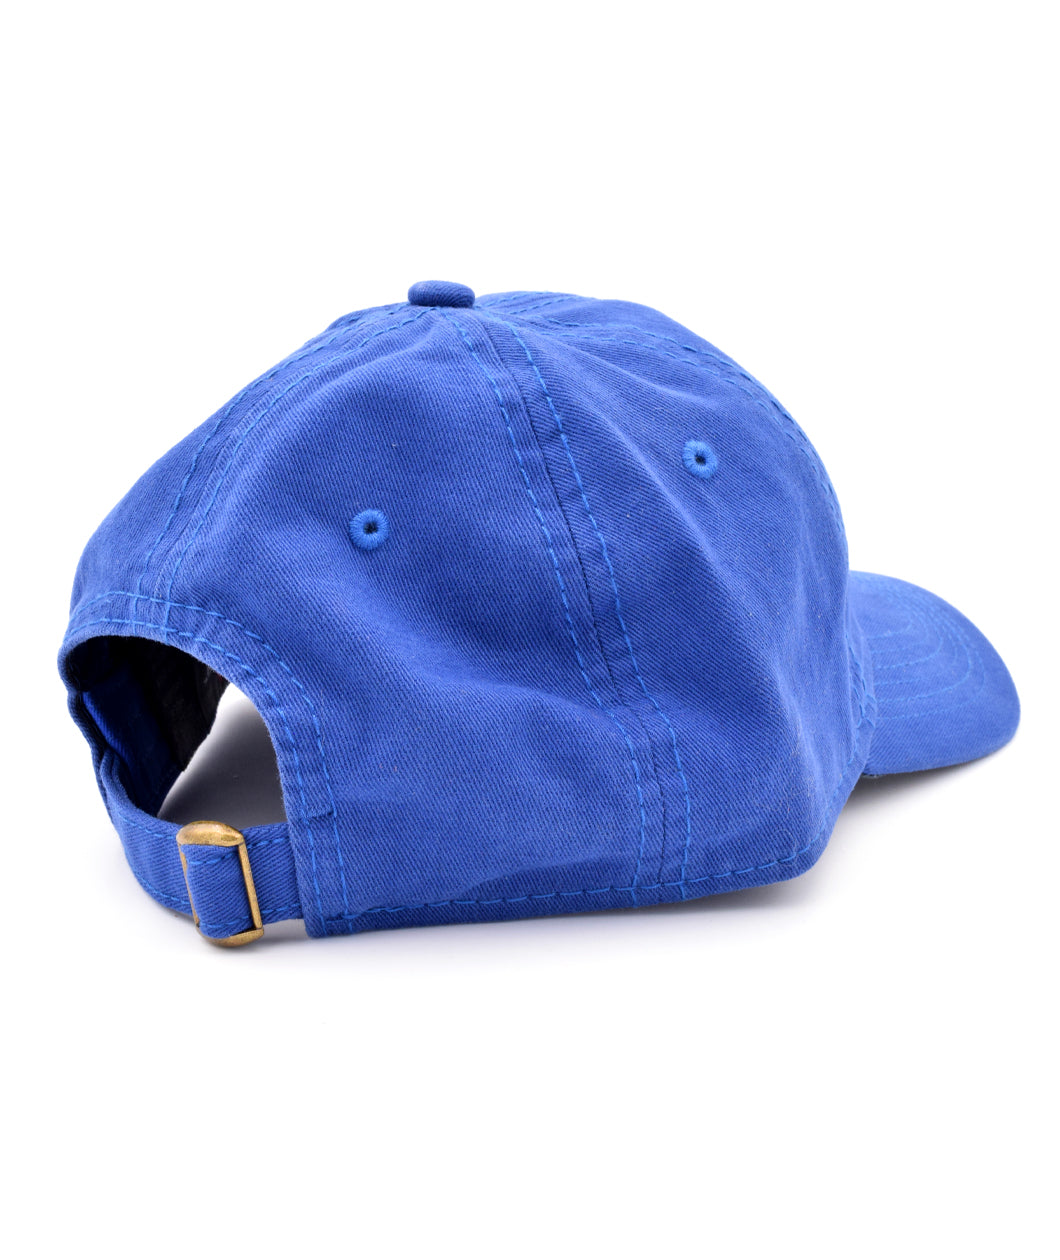 The back of a blue ball cap showing the tightening clasp. From Brian David Gilbert.